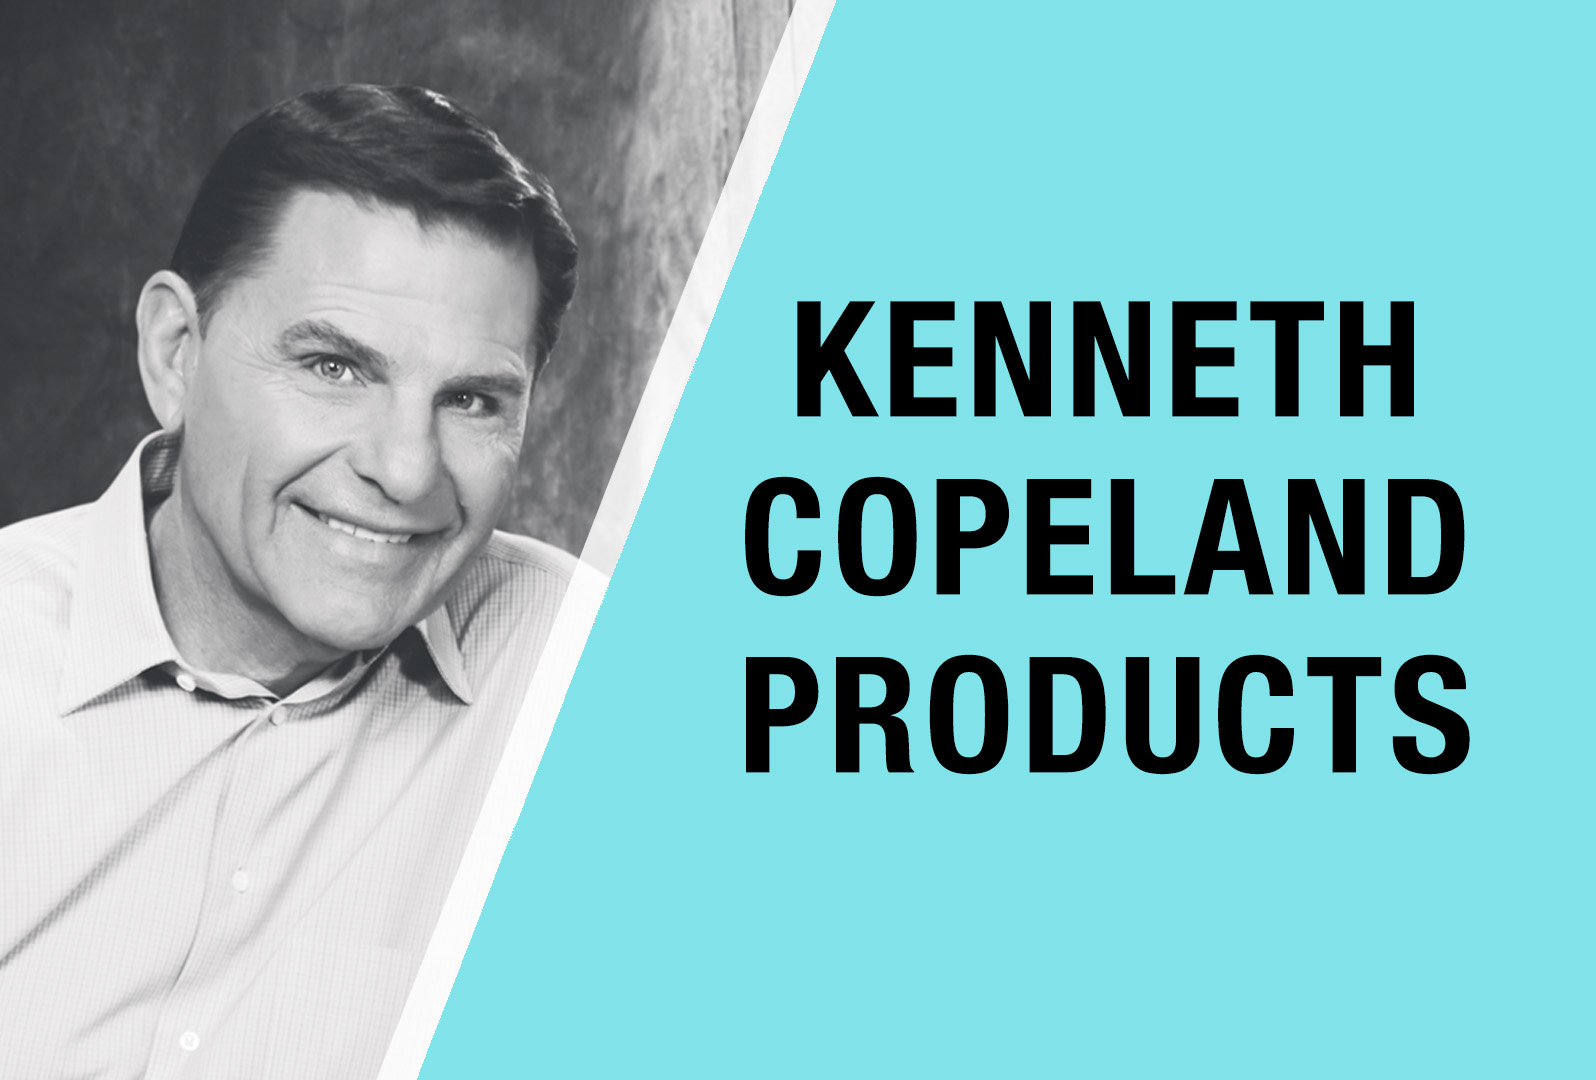 Kenneth Copeland Products